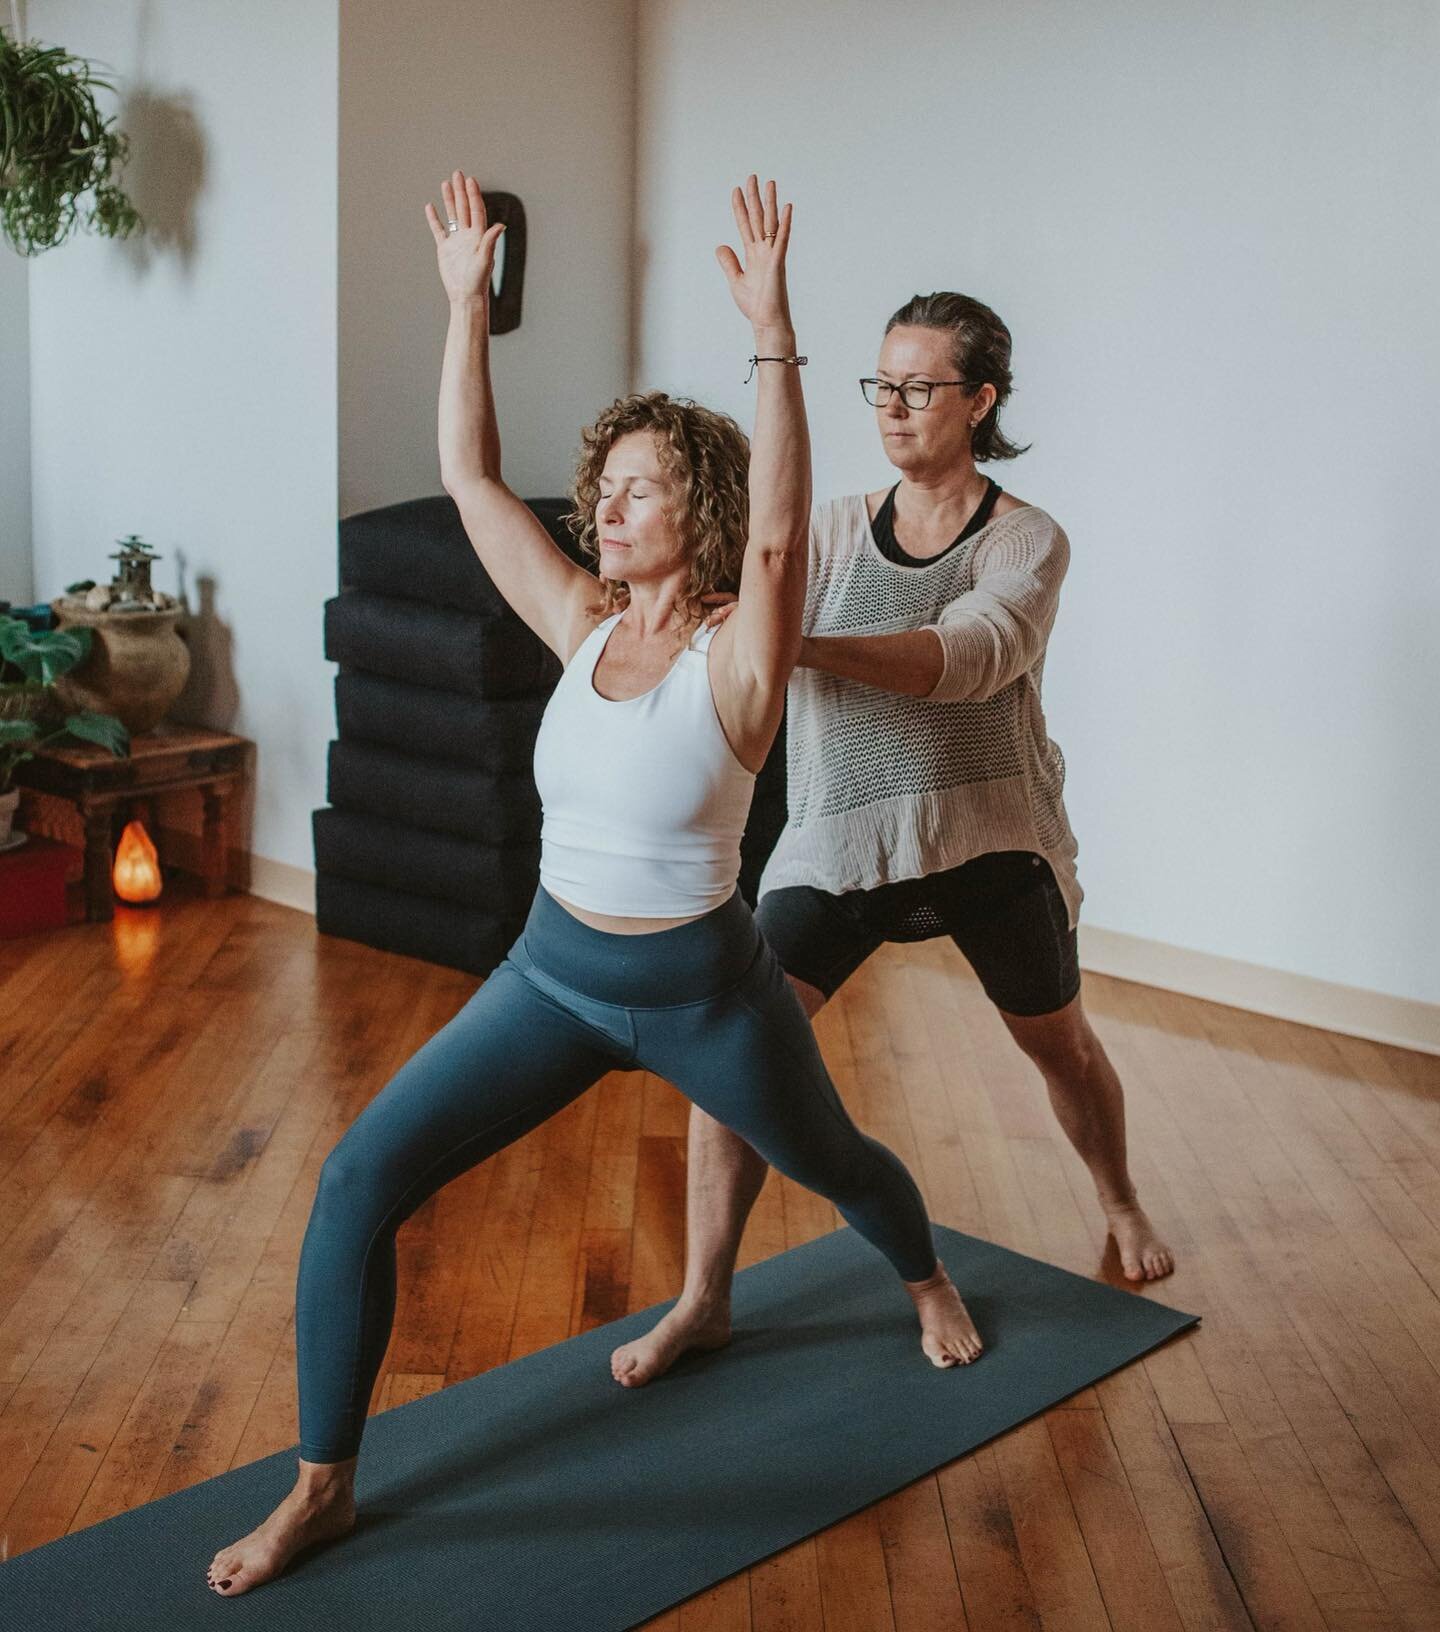 Free Info session with @kristincork 
 100 hr Yoga Immersion 
 200 hr Yoga Teacher Training 
Sunday, Aug 28 ~ 11 am by the river after @lam_yoga @jendankosky Restorative Yoga Class.
* 100:200 hr journeys begin again in Sept @lam_yoga - 3 spots left.
*